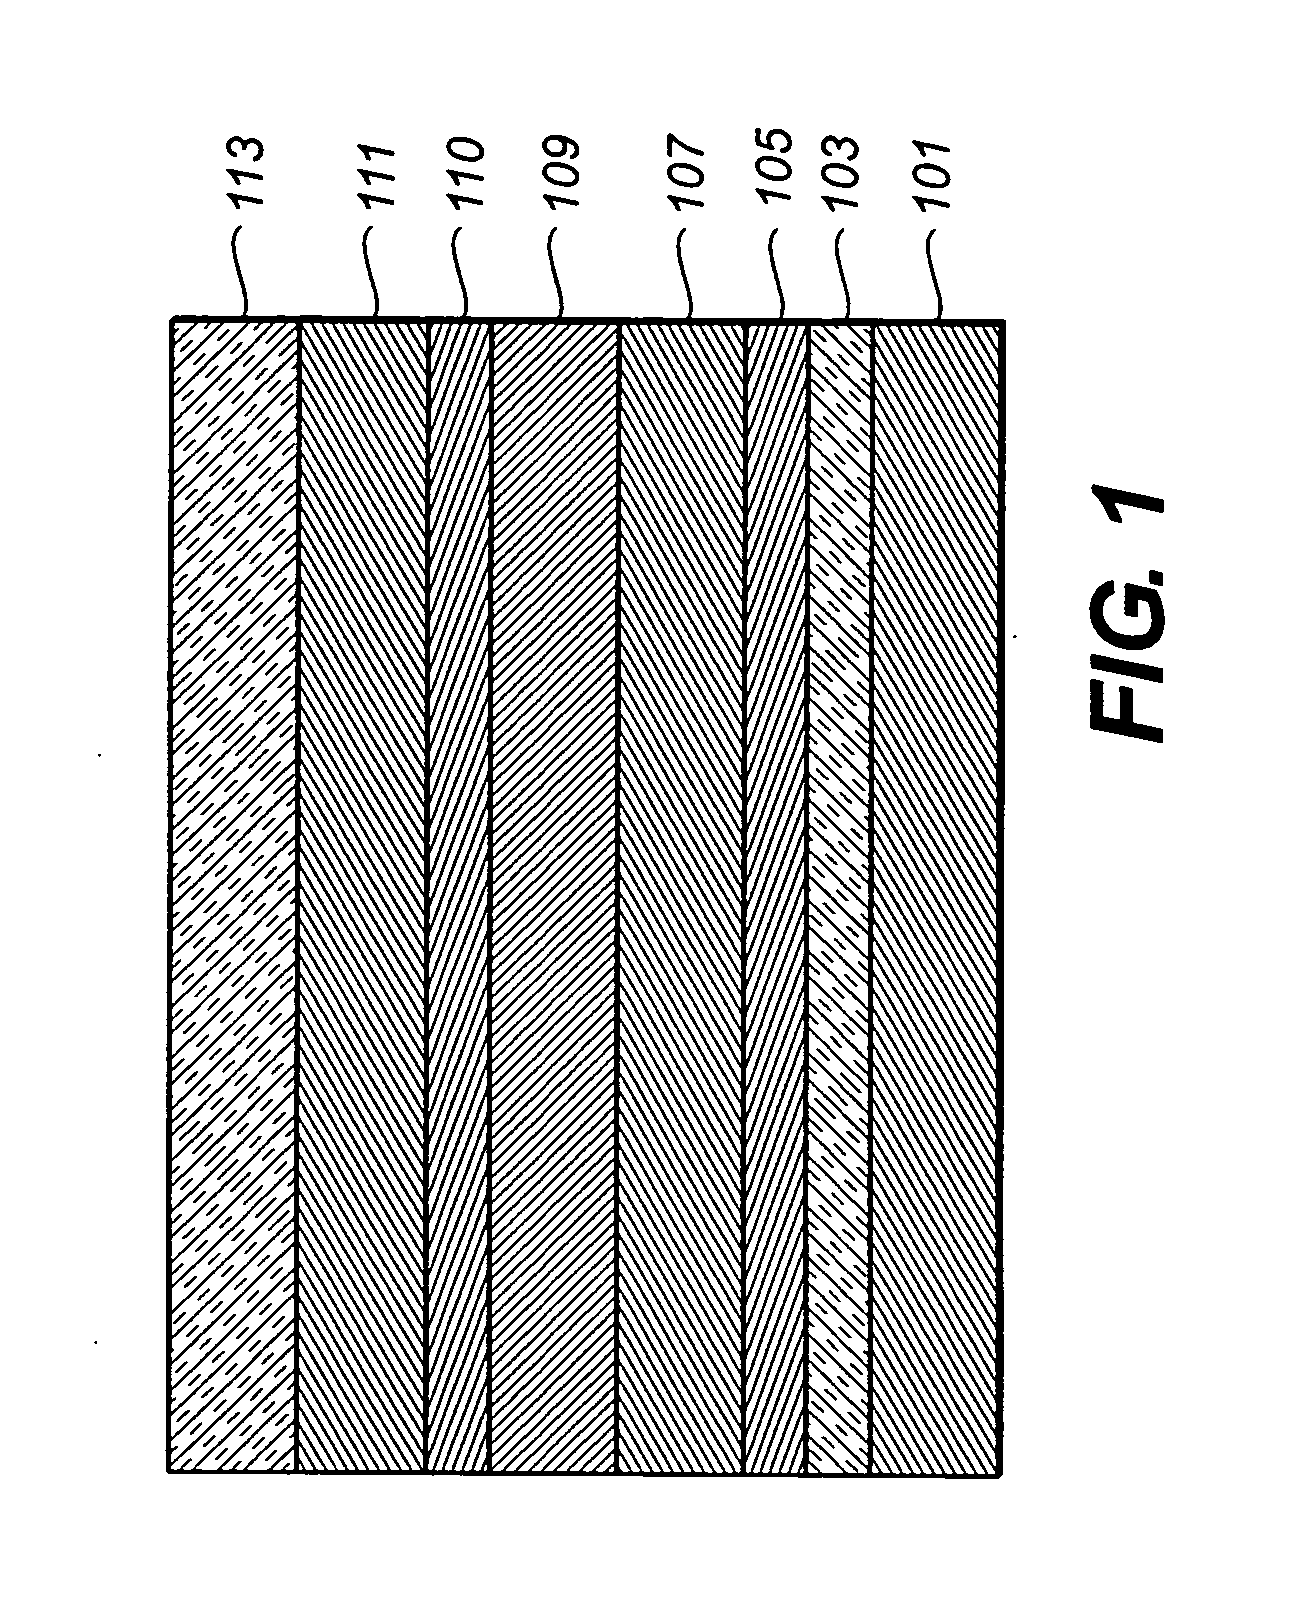 Organic element for electroluminescent devices